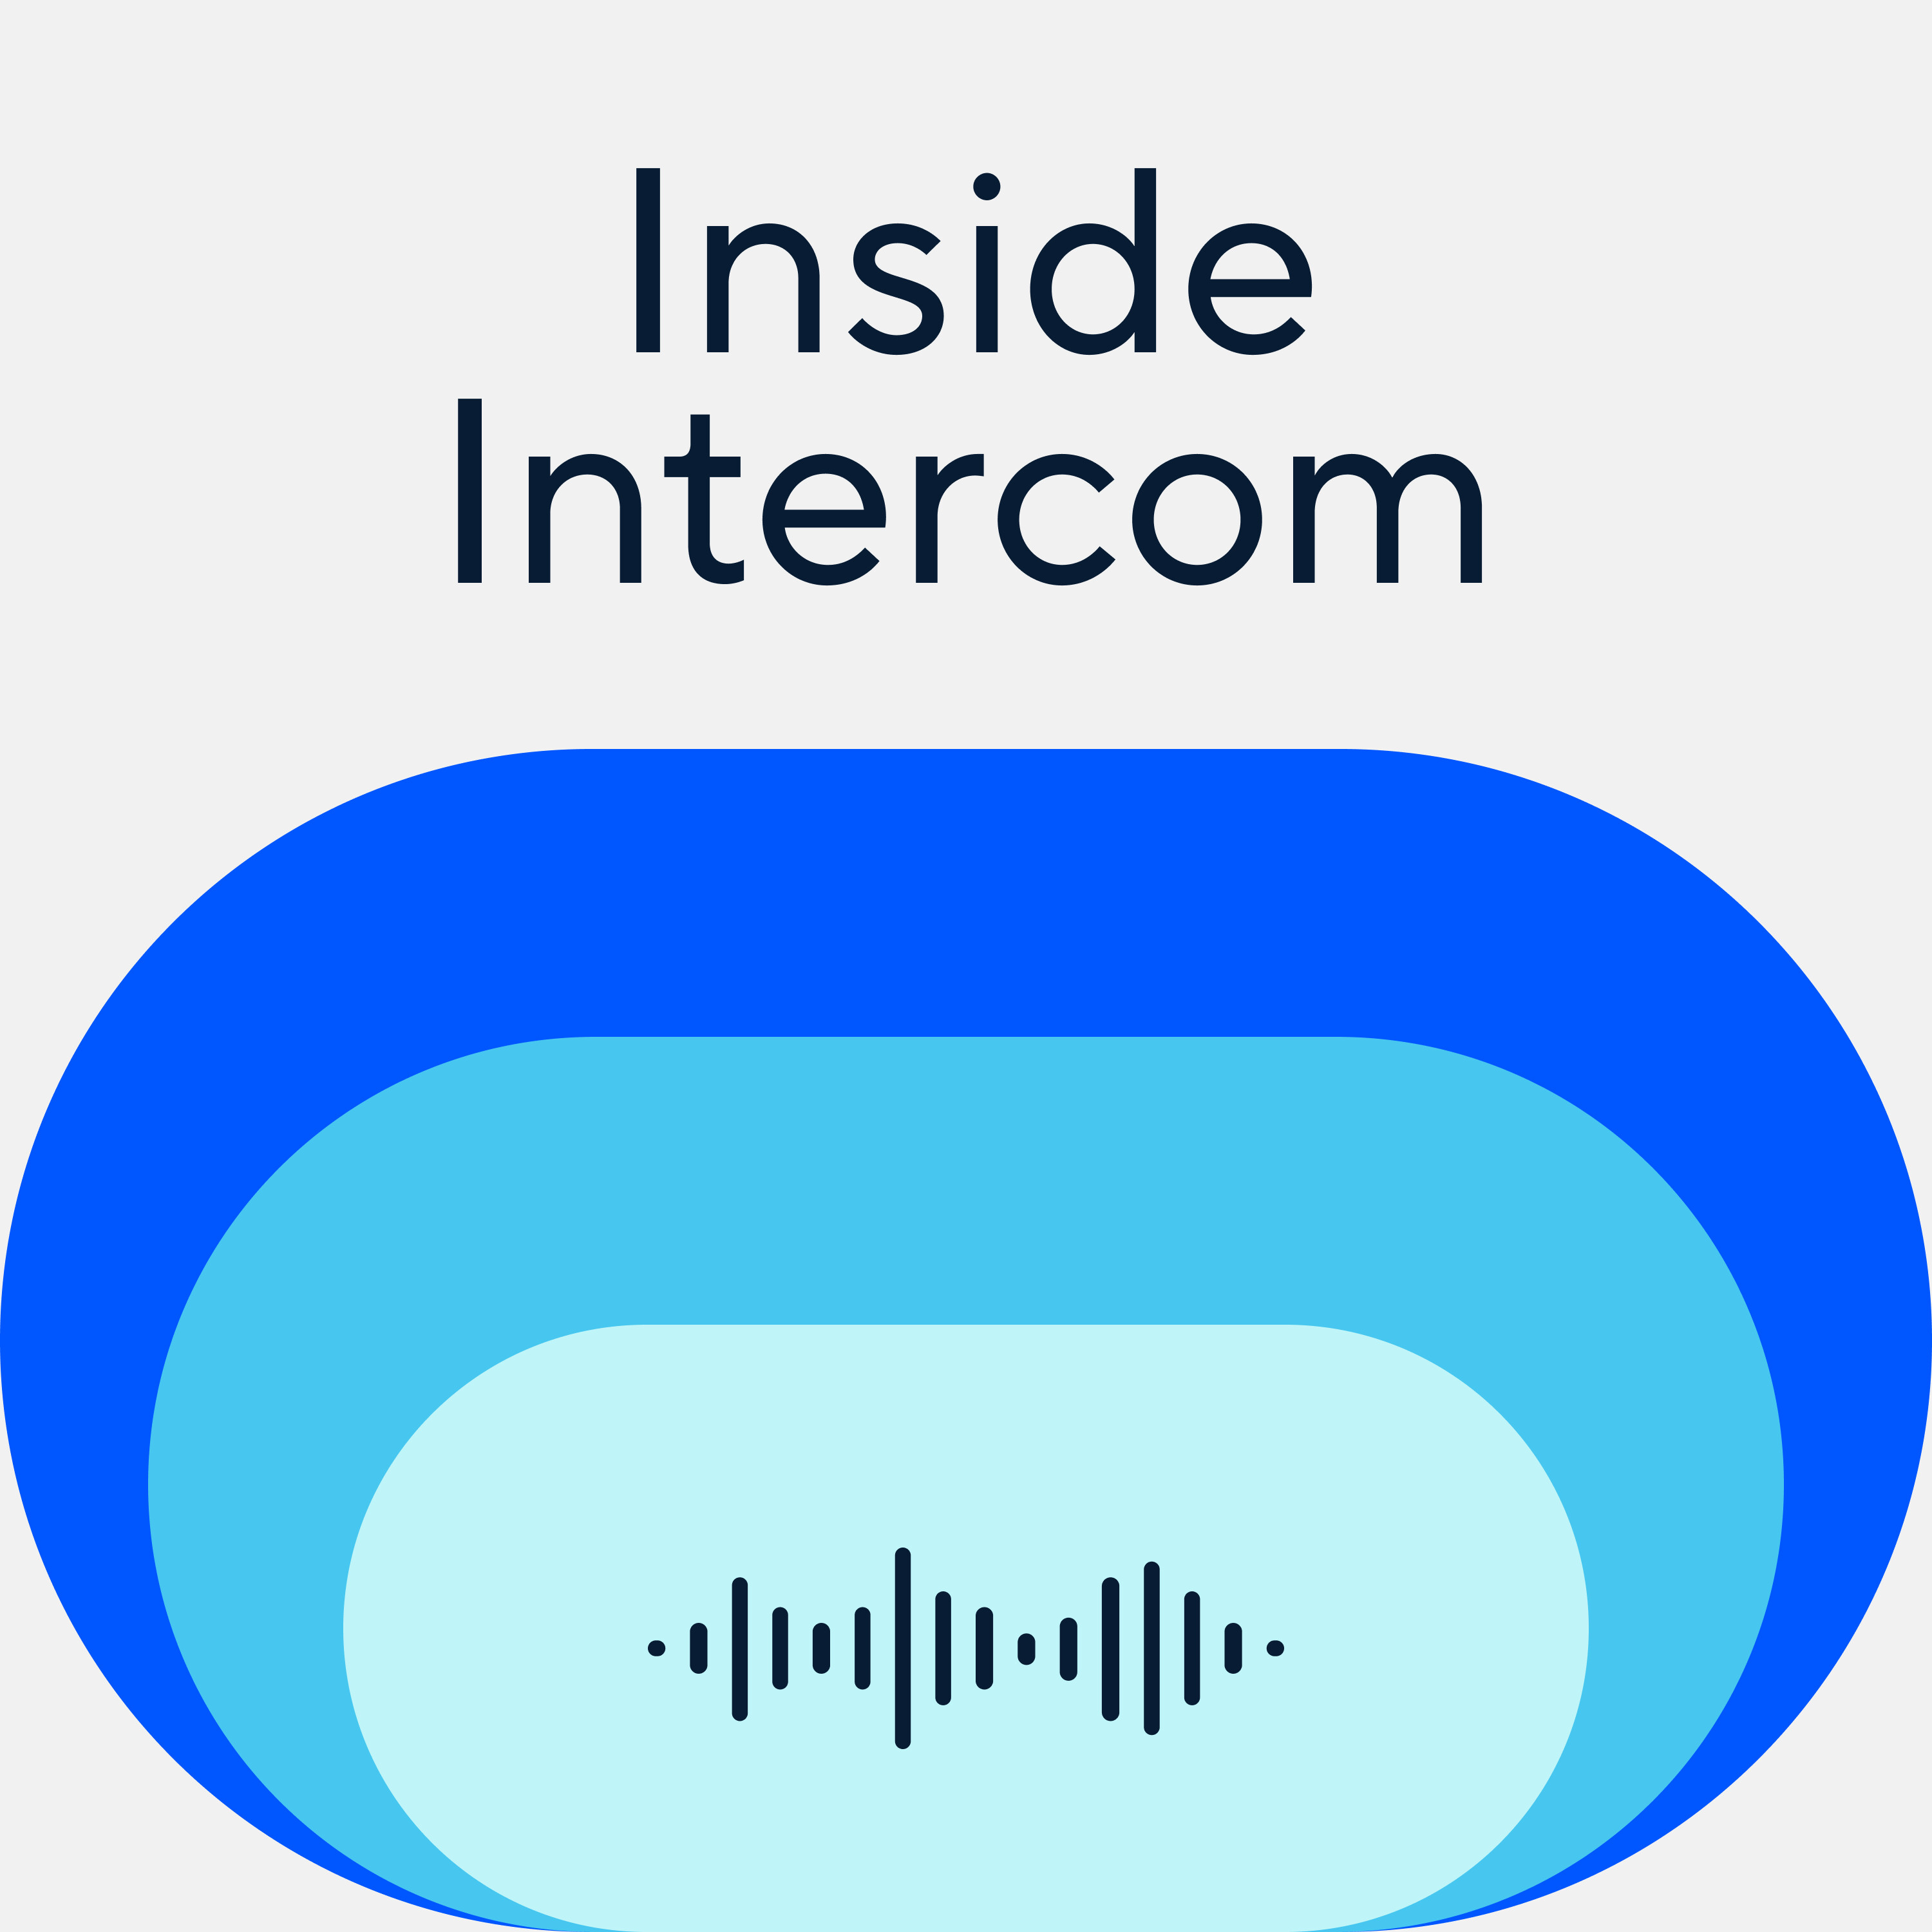 Intercom on Product: The principles behind how we build